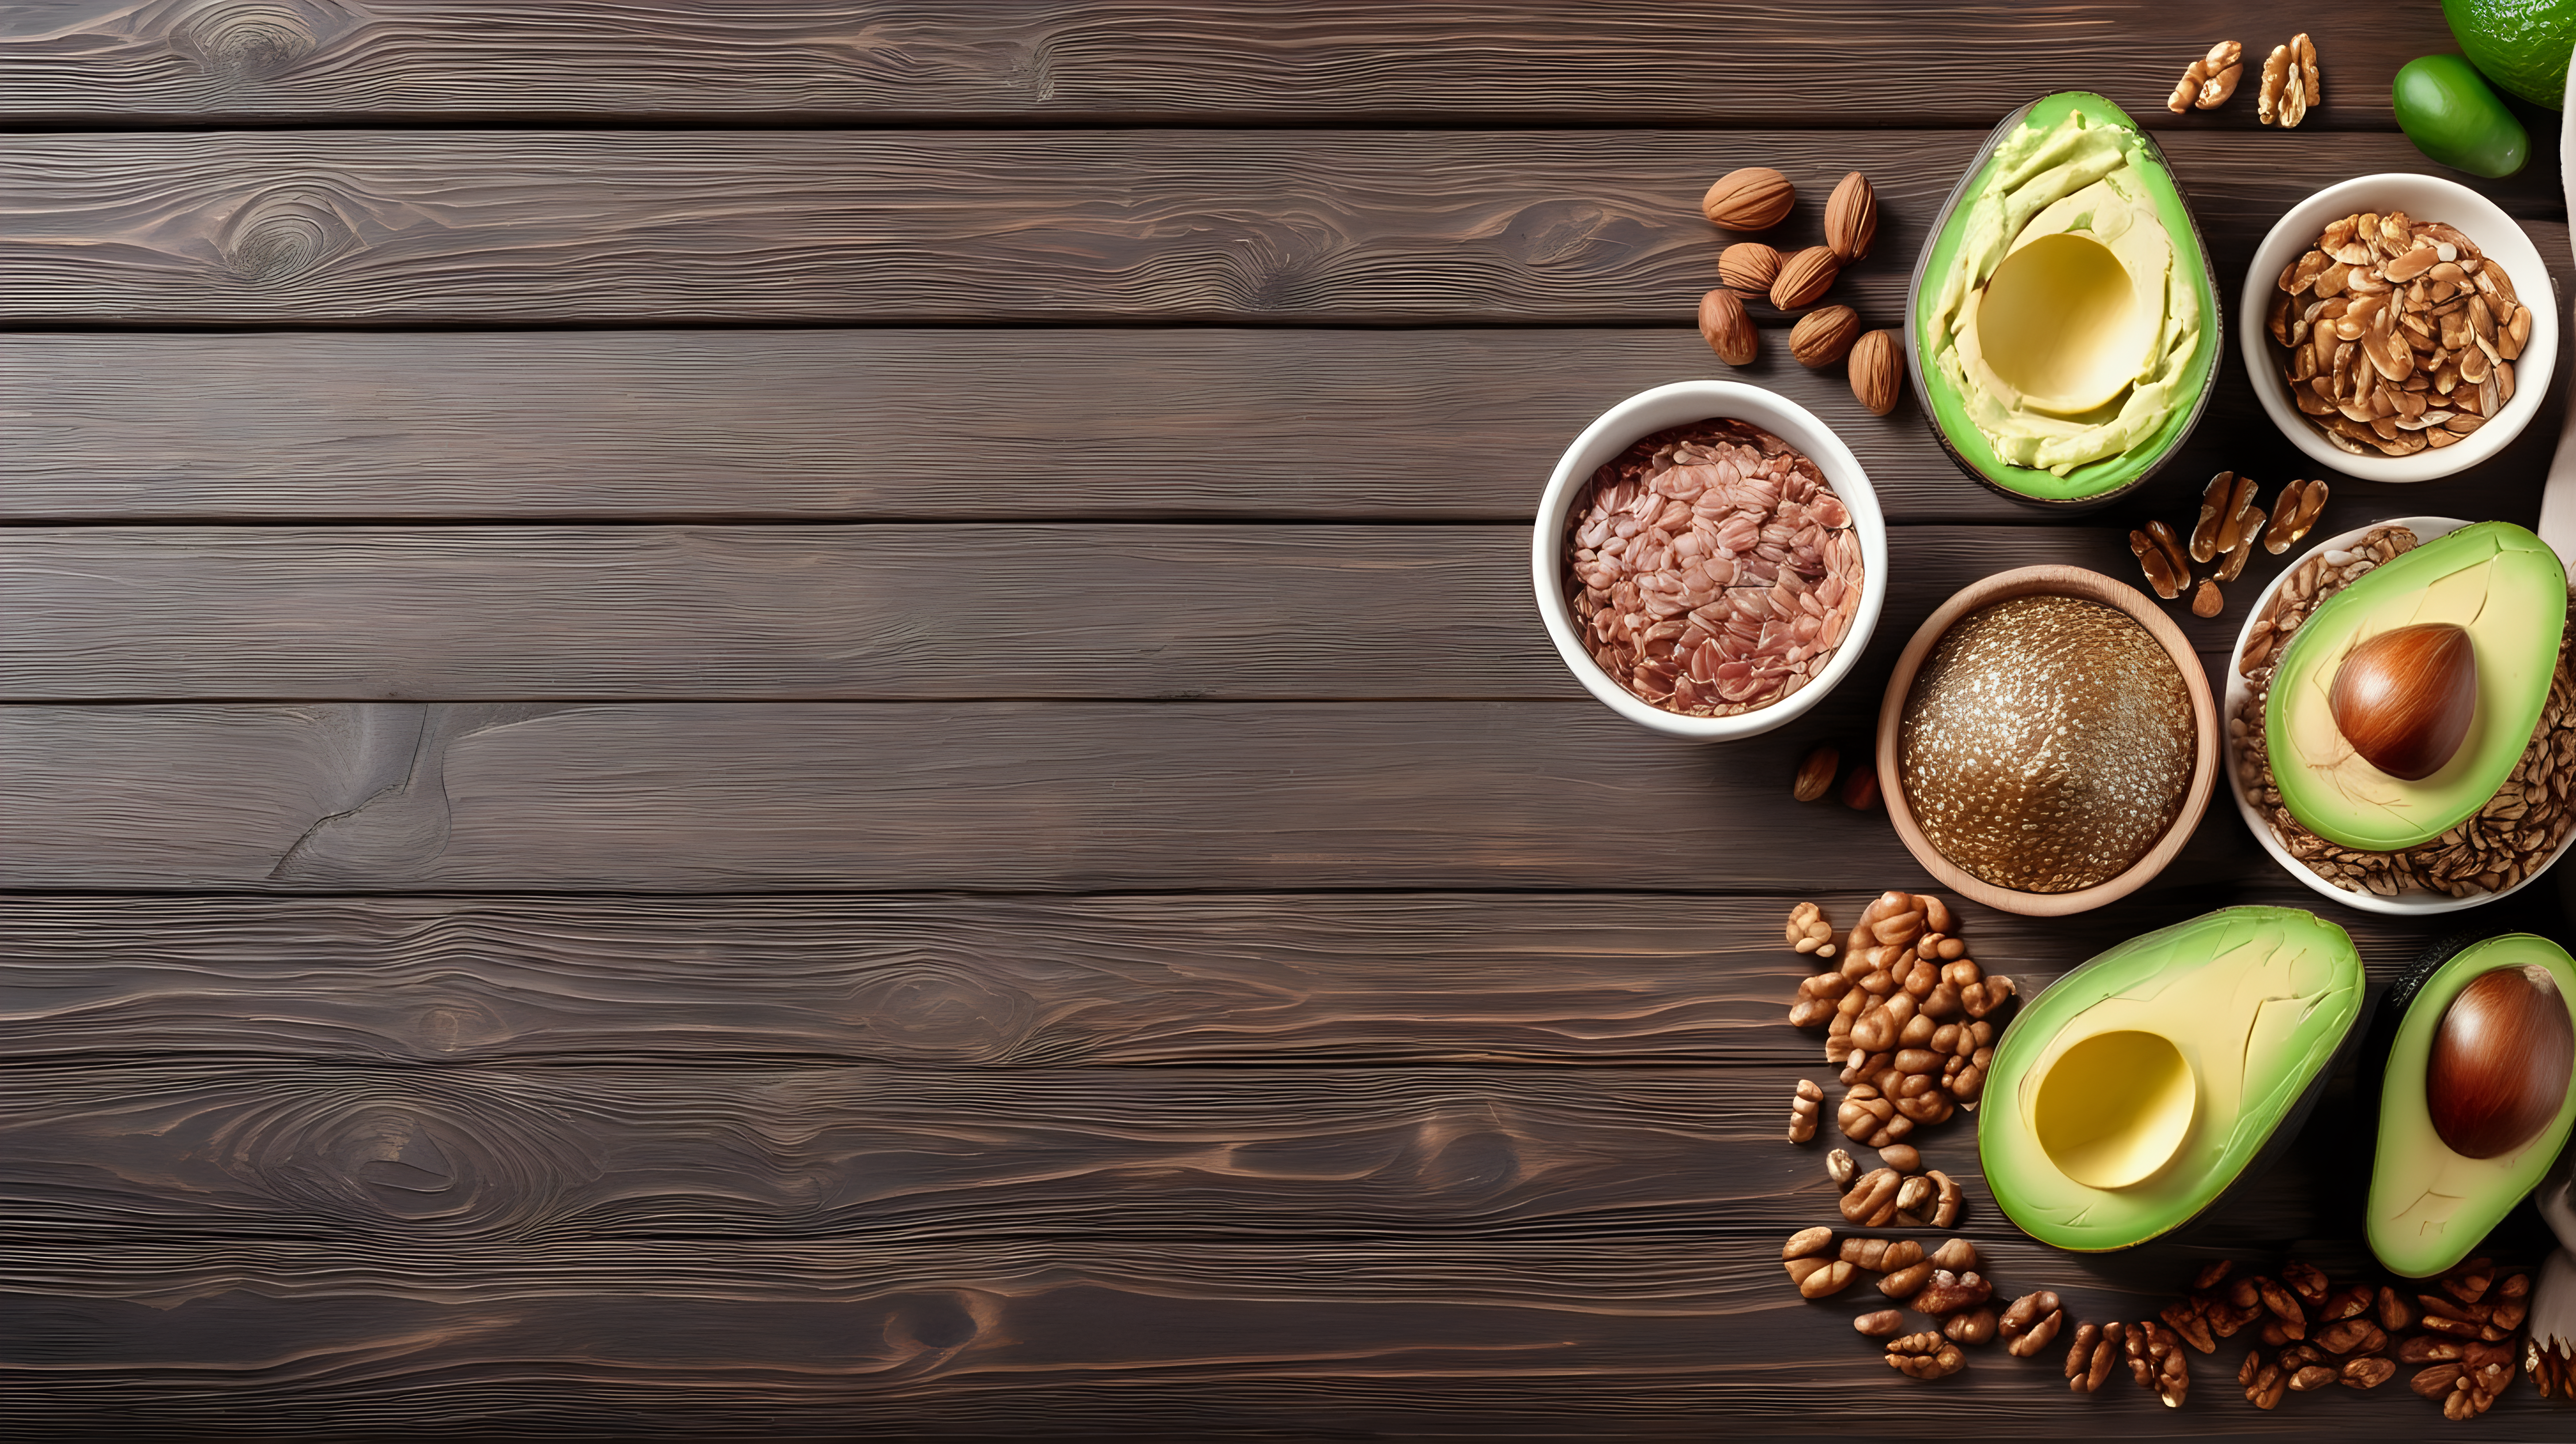 Sources of omega 3 fatty acids, flaxseeds, avocado, salmon and walnuts on wooden table, copy space